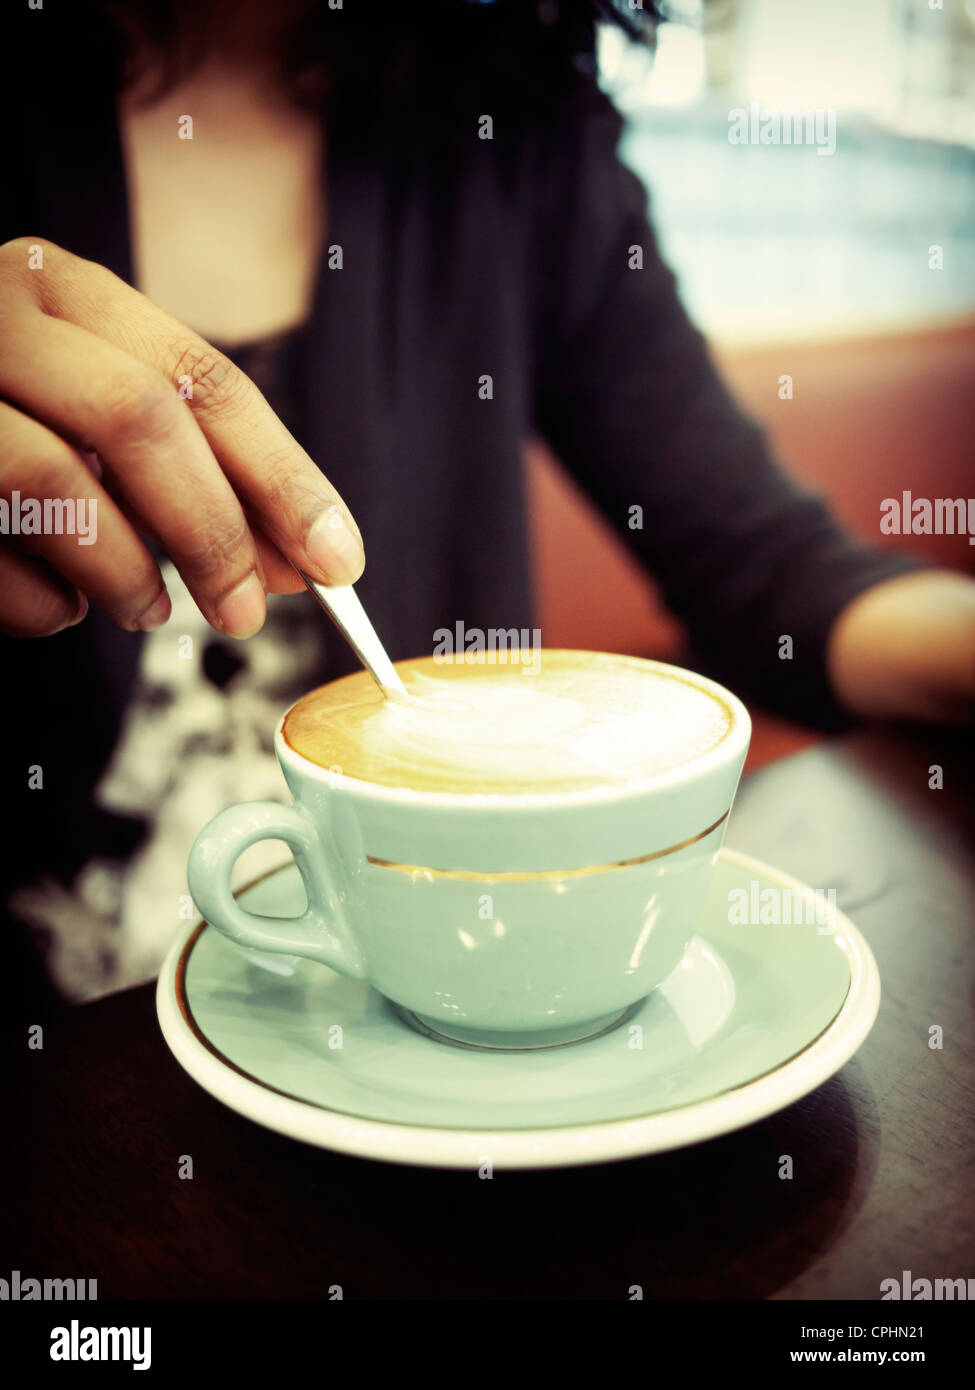 Woman stirs cup of coffee in cafe. Stock Photo